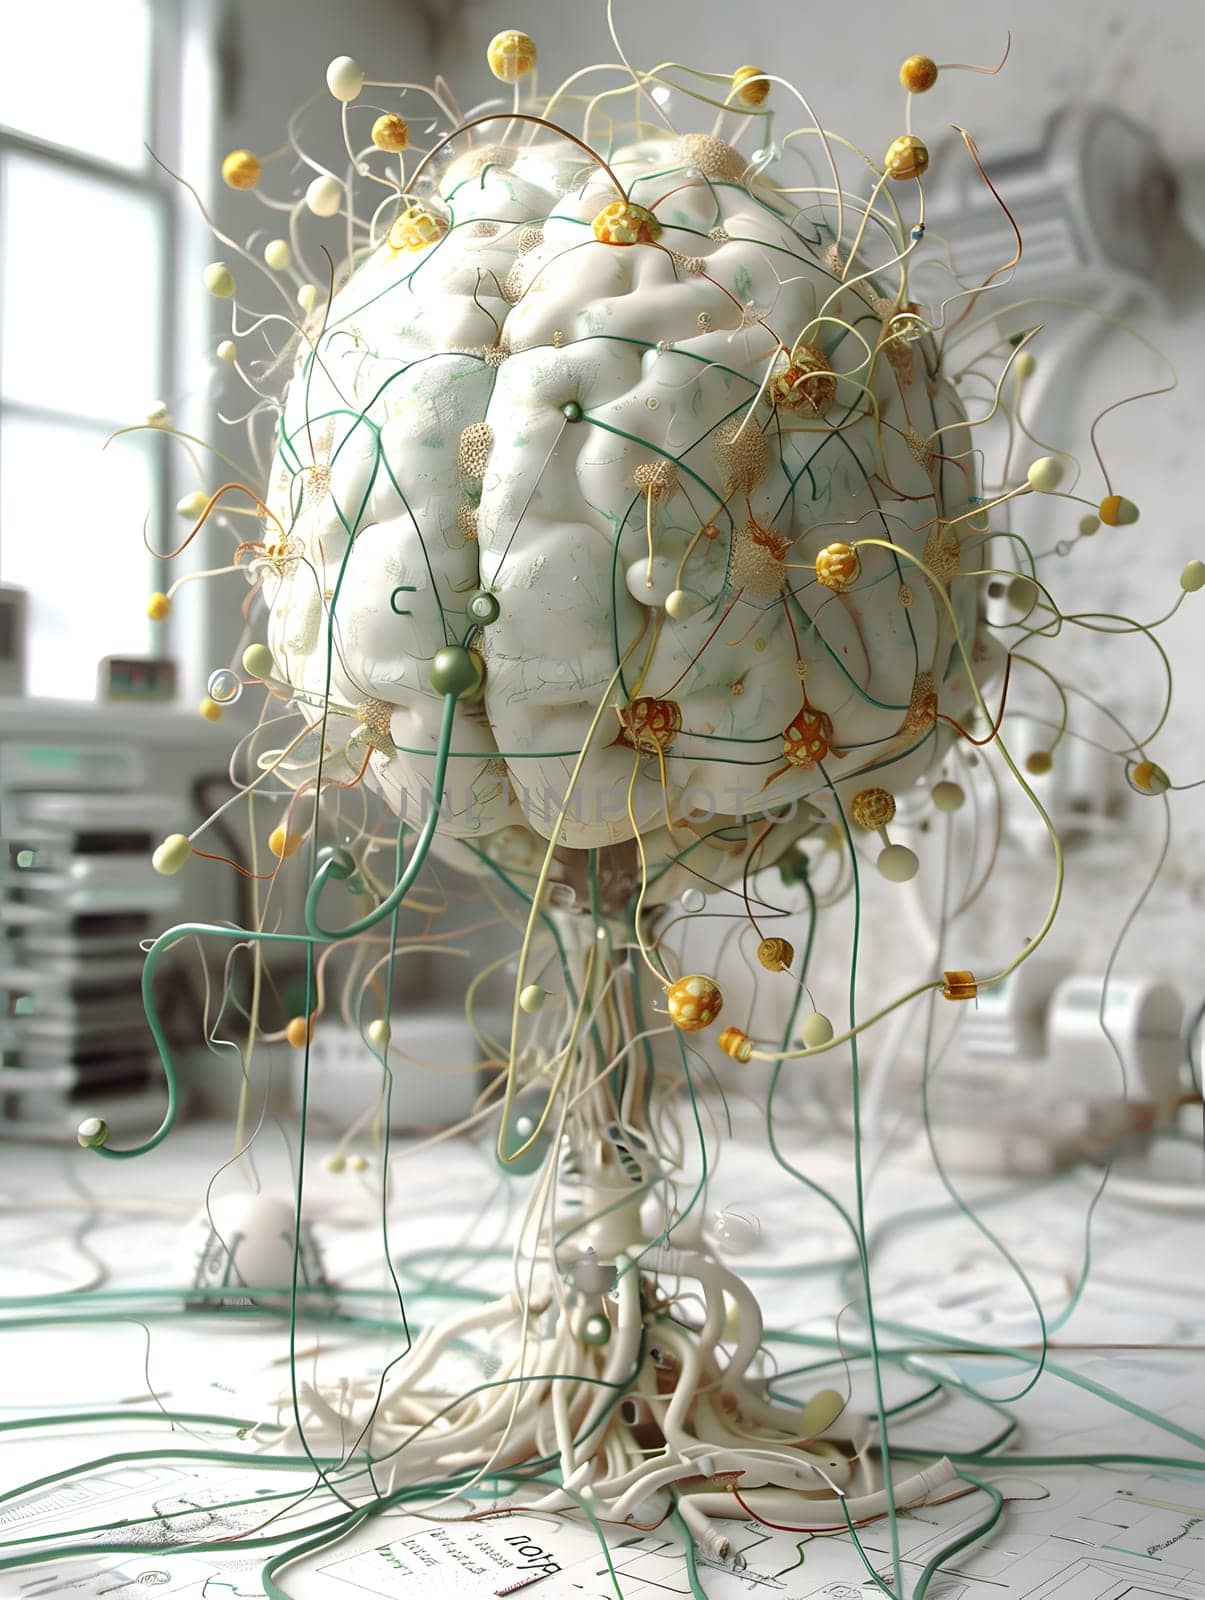 A brain sculpture intertwined with branches, twigs, and flowers, symbolizing the connection between nature and human intellect. Snowcovered trees outside the window add a touch of winter charm